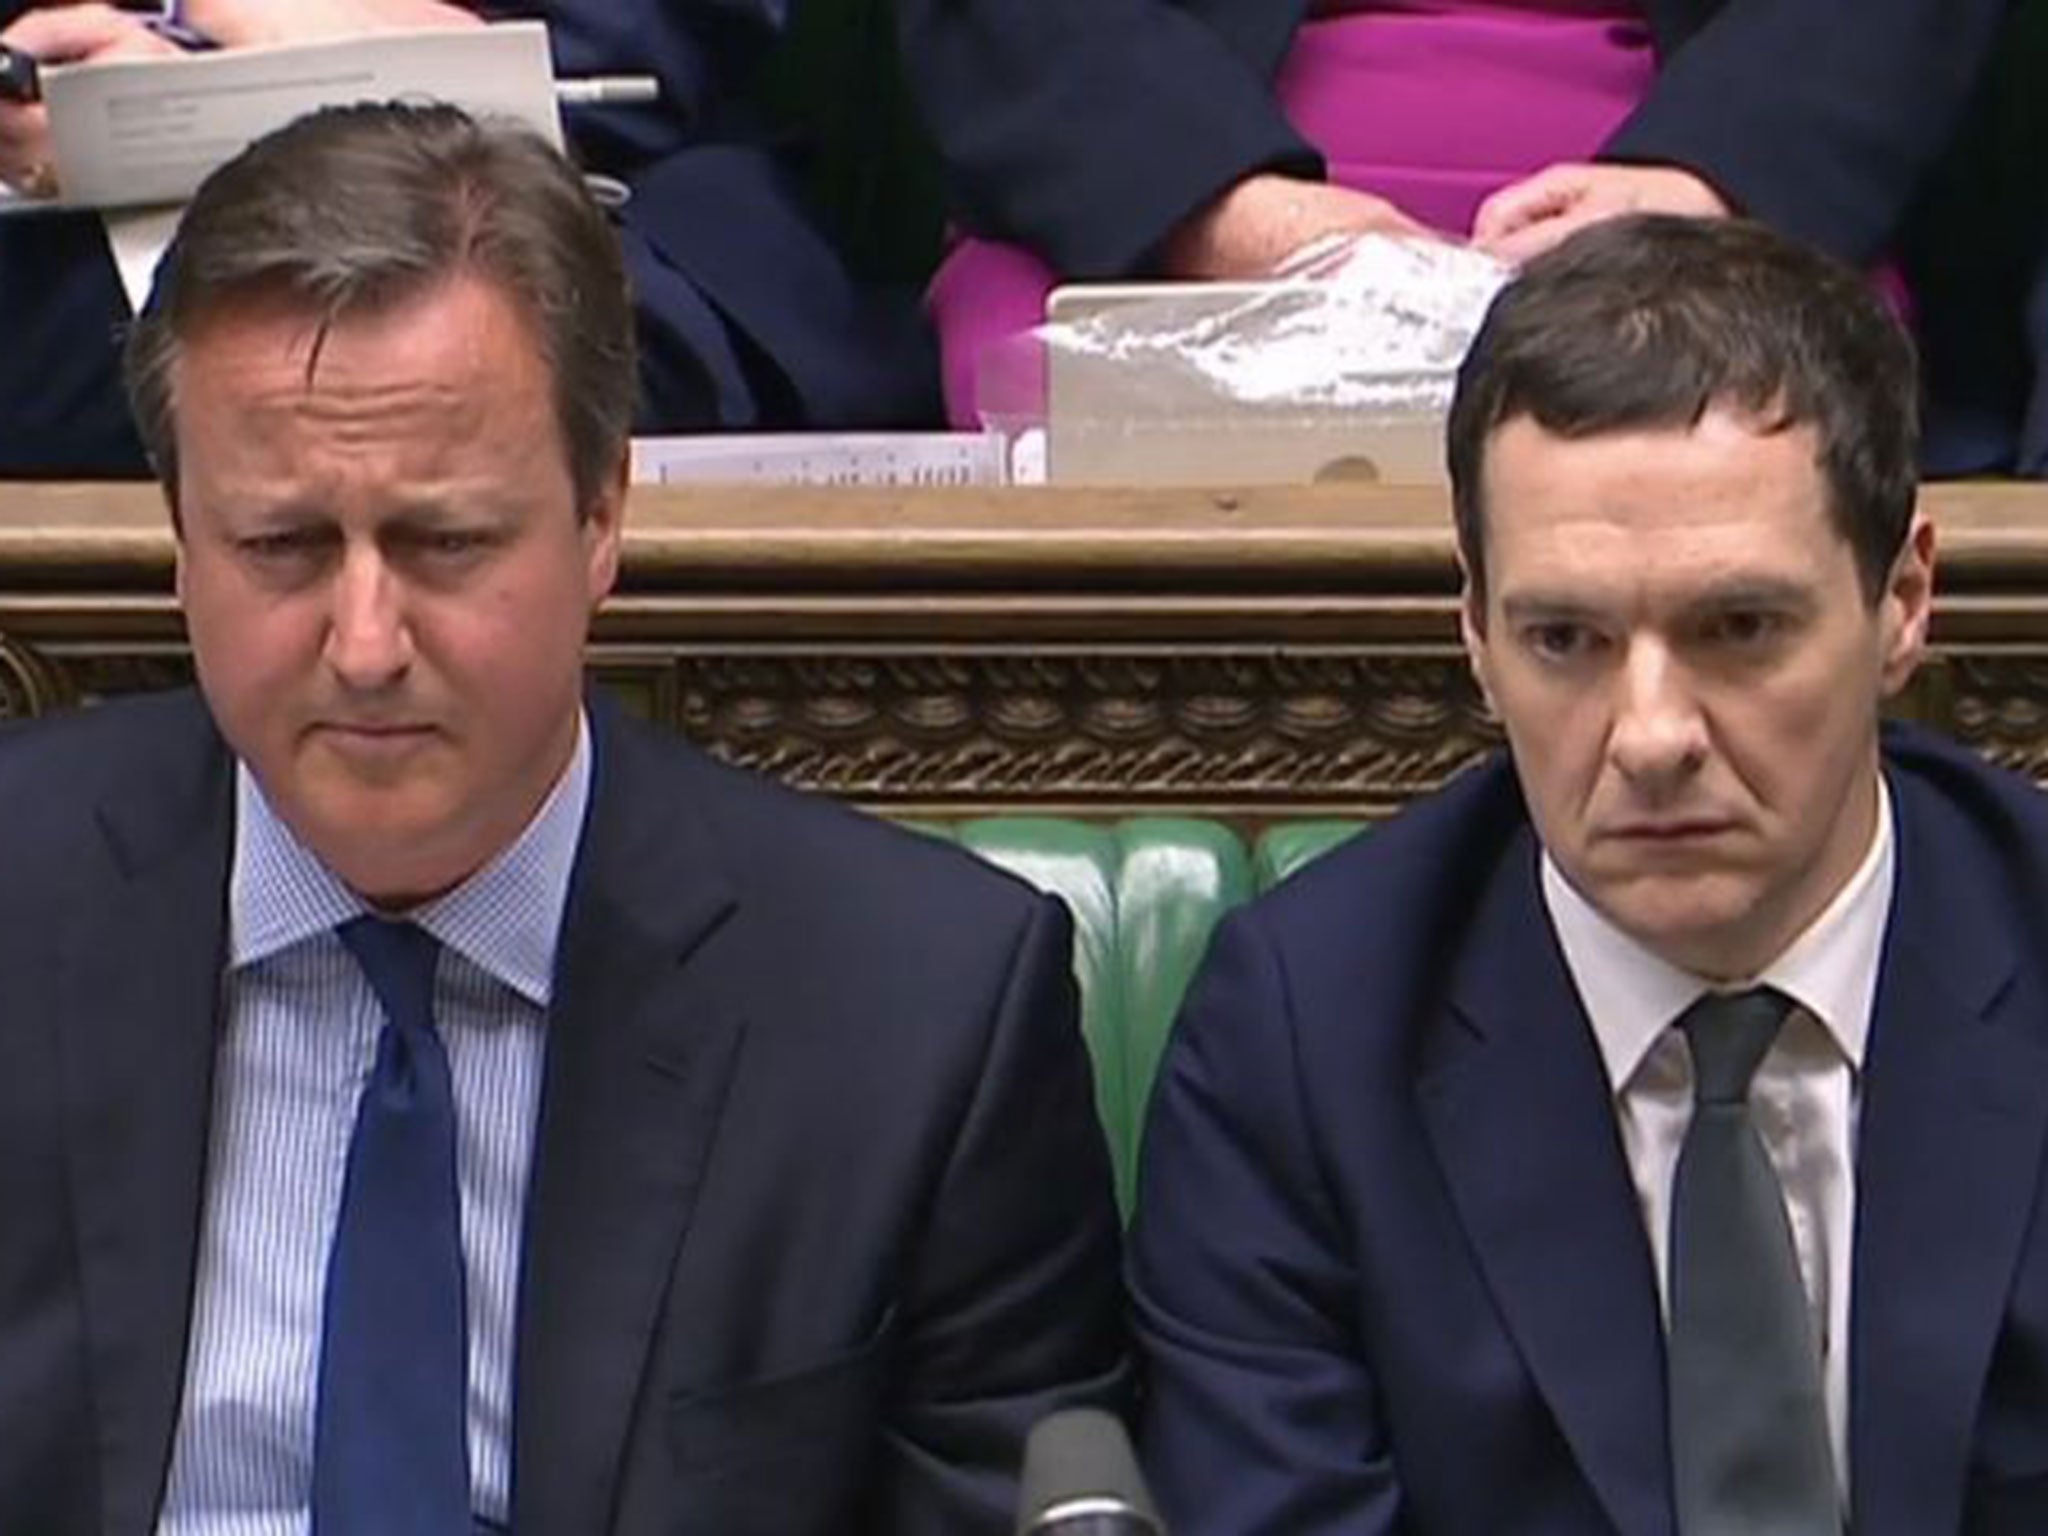 David Cameron and George Osborne were braced for a Parliamentary grilling from Labour and other members of the House